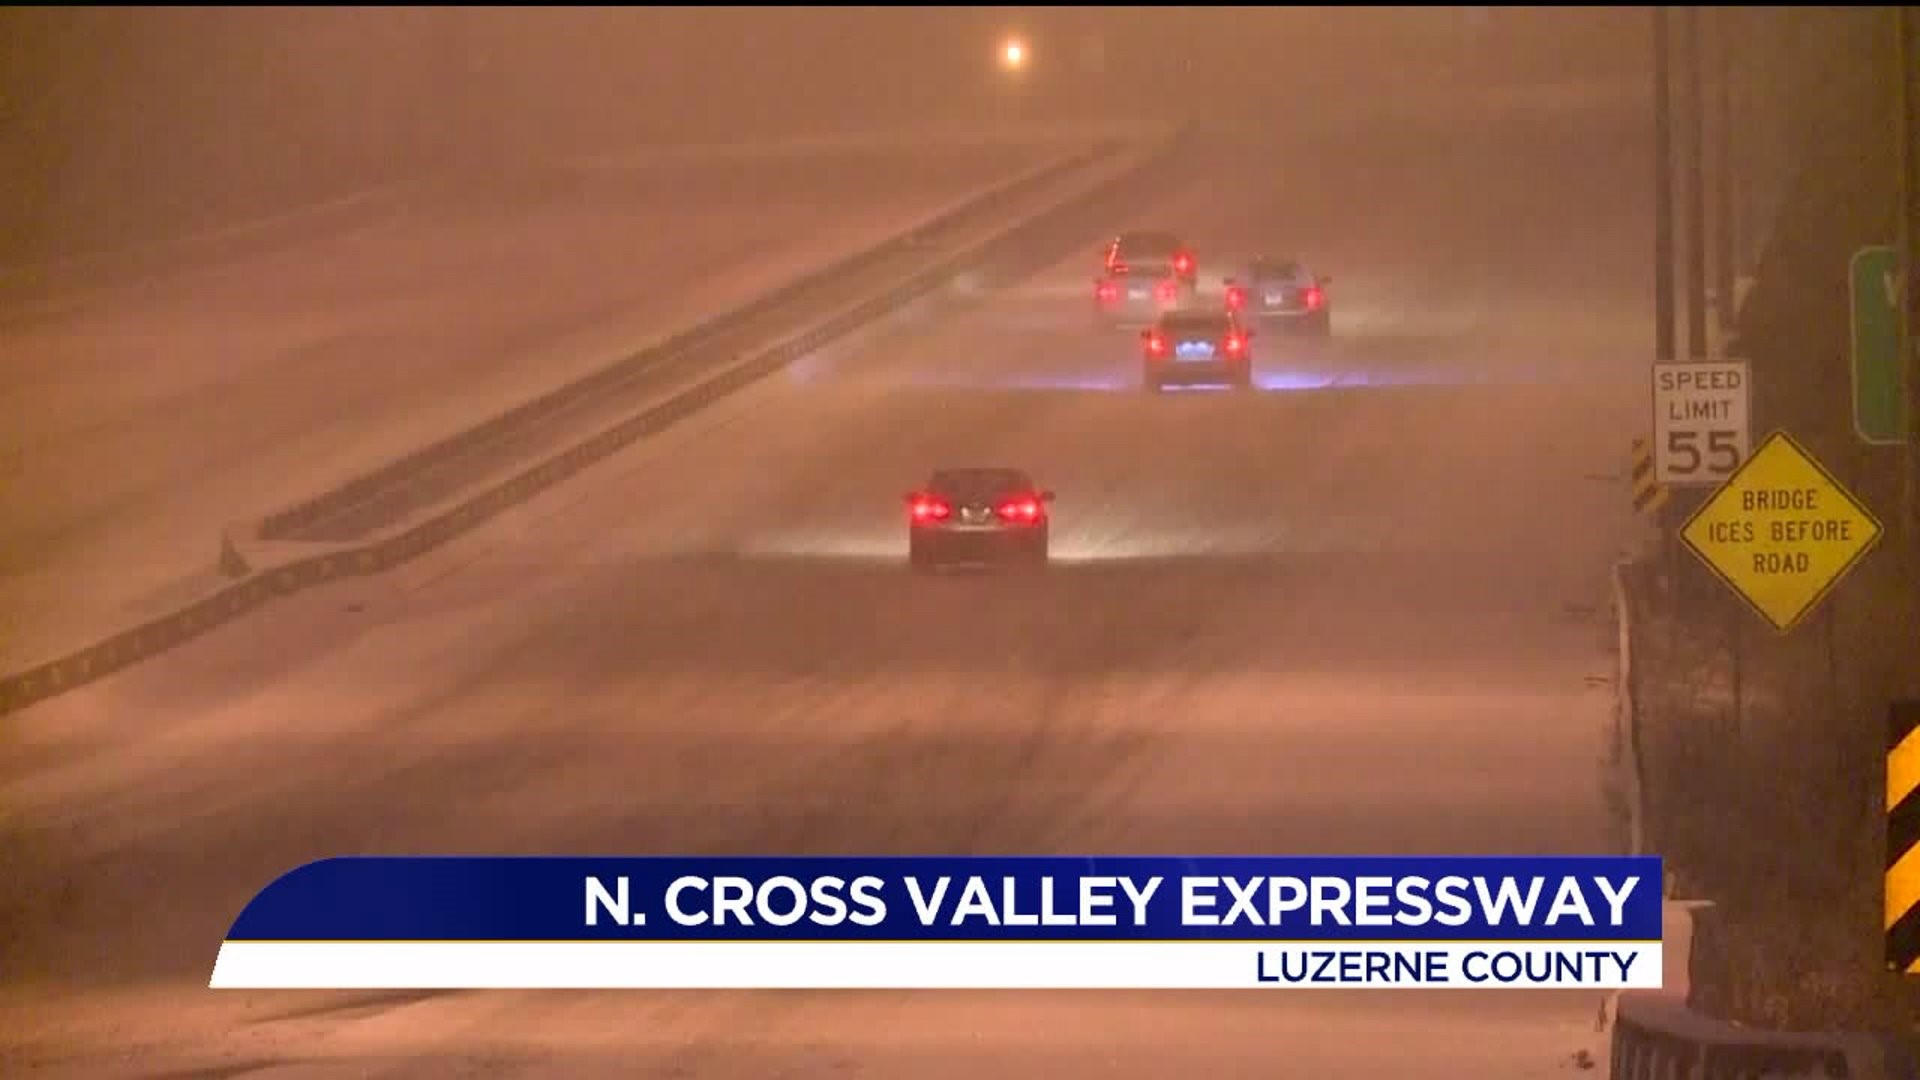 Snow Hits Luzerne County Overnight